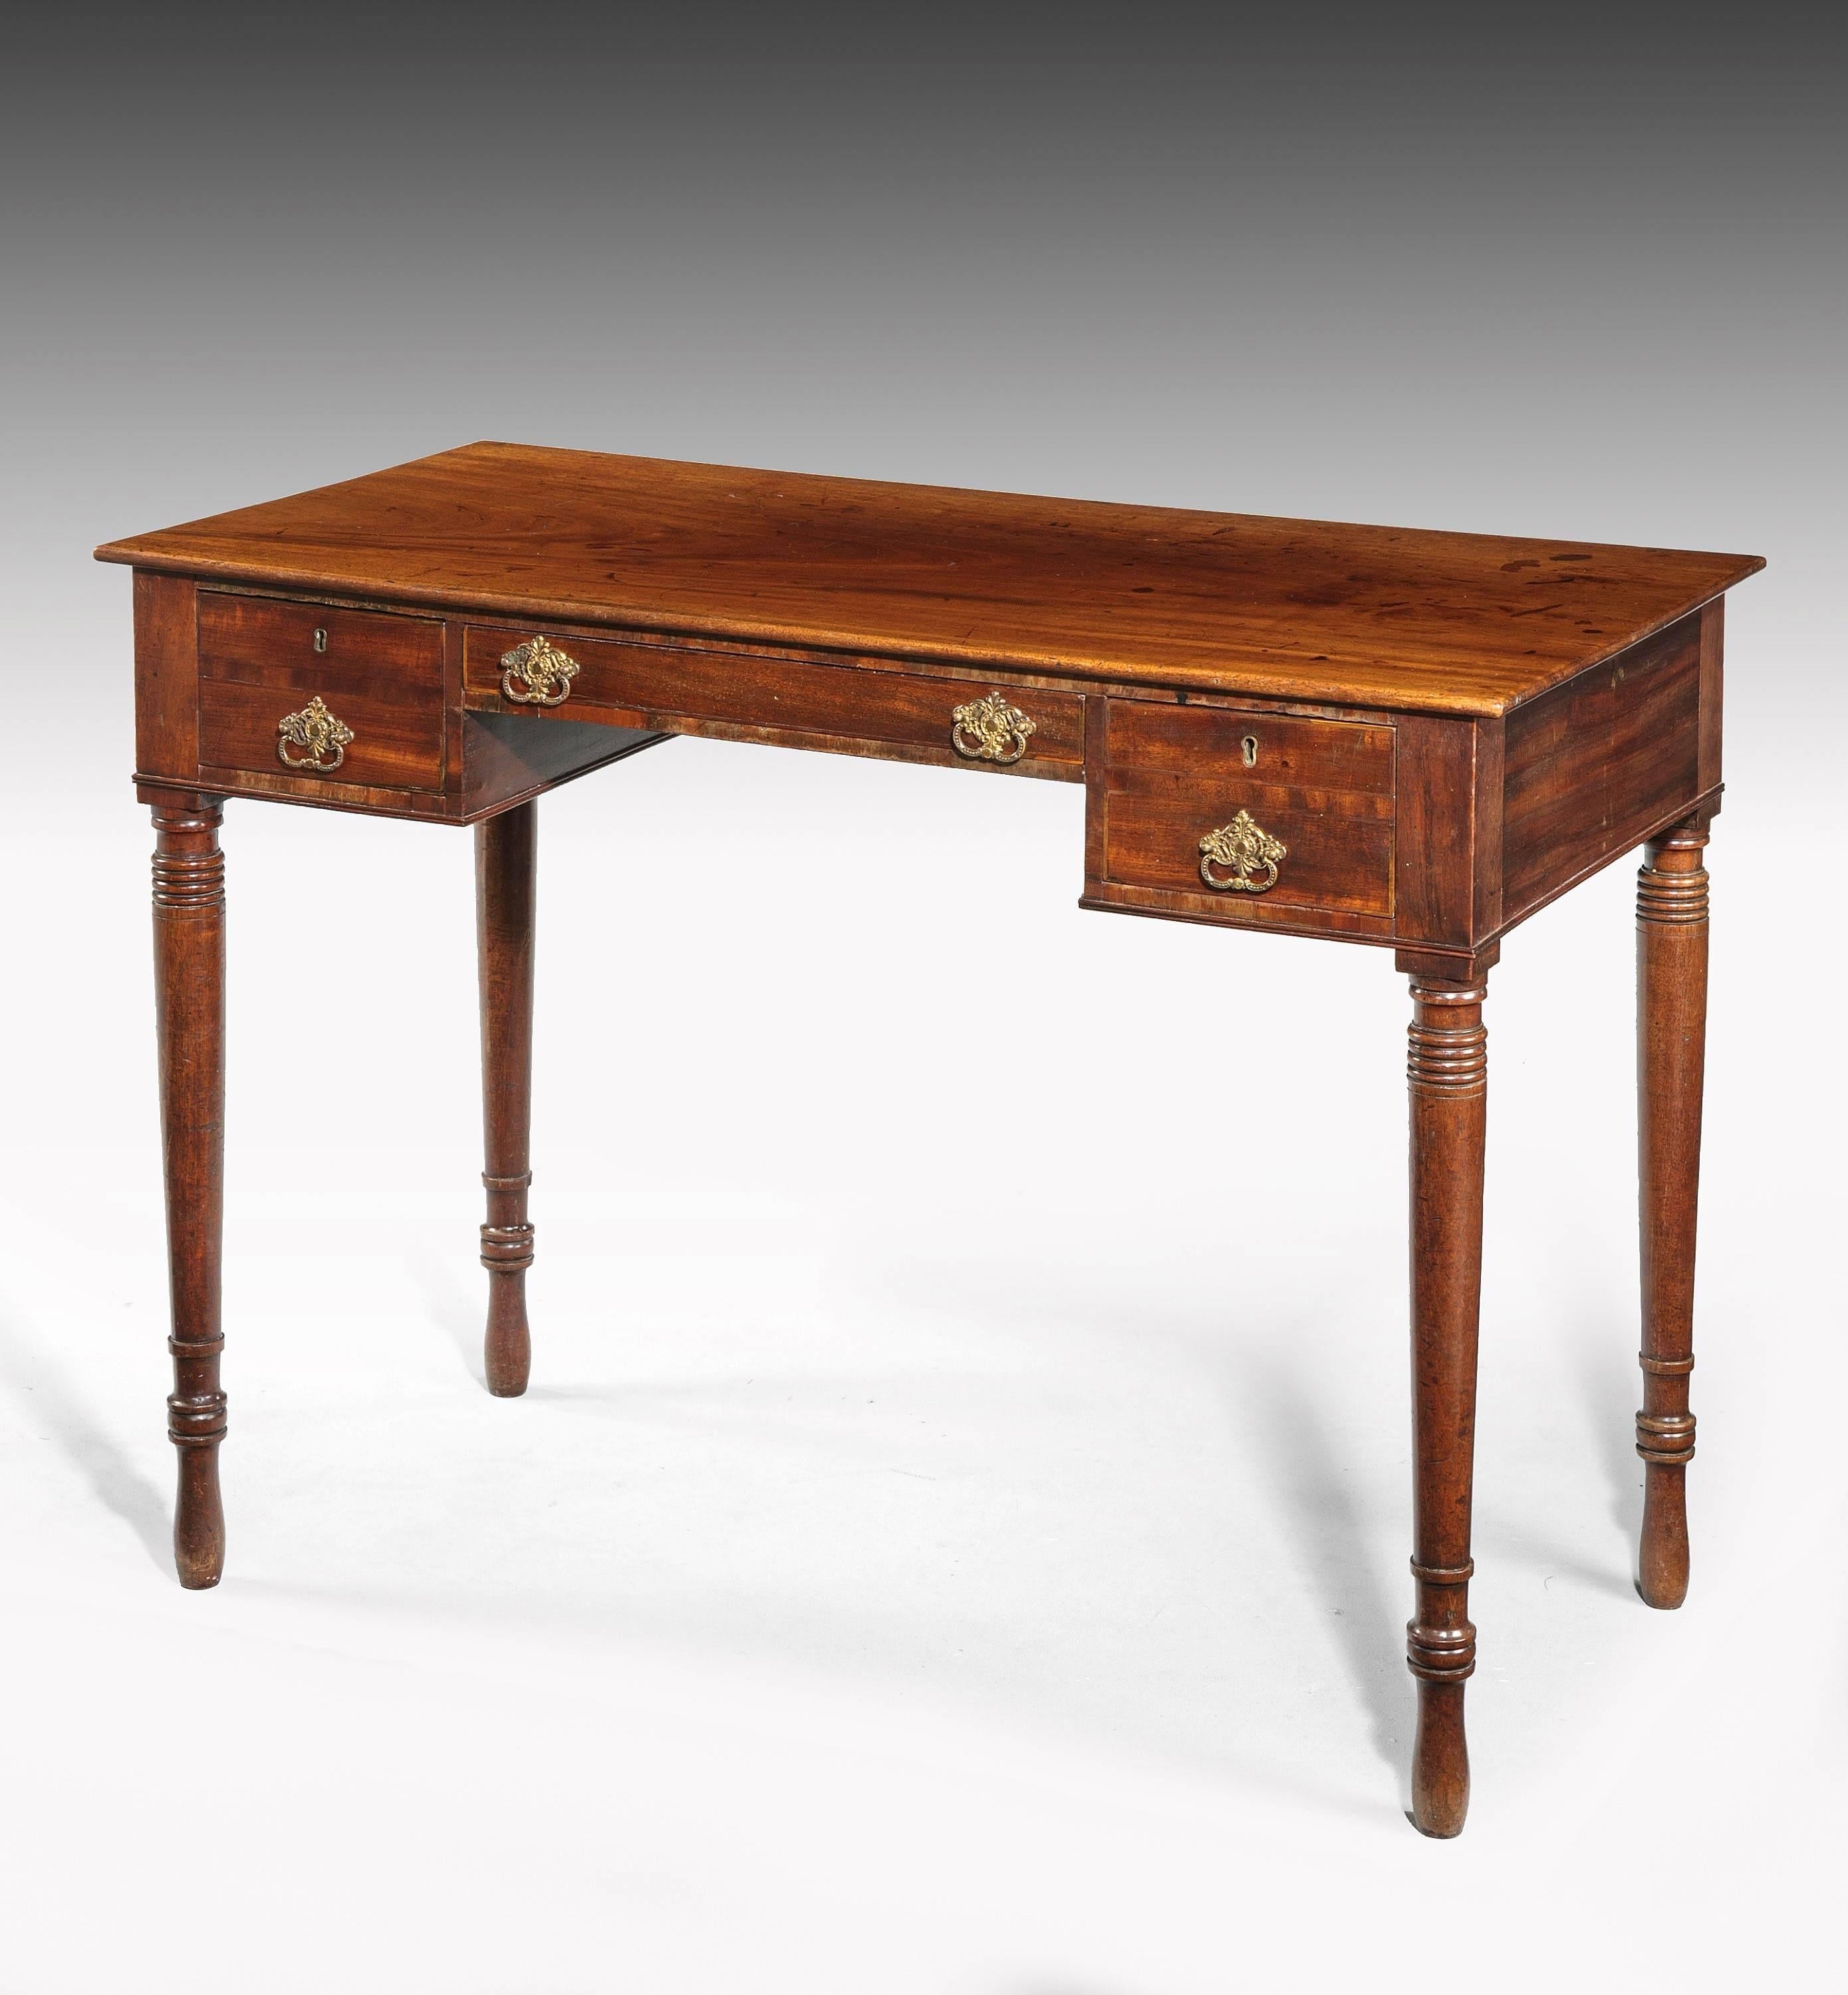 A Regency period mahogany side or writing table. The slender top section incorporating three drawers. On finely turned supports.